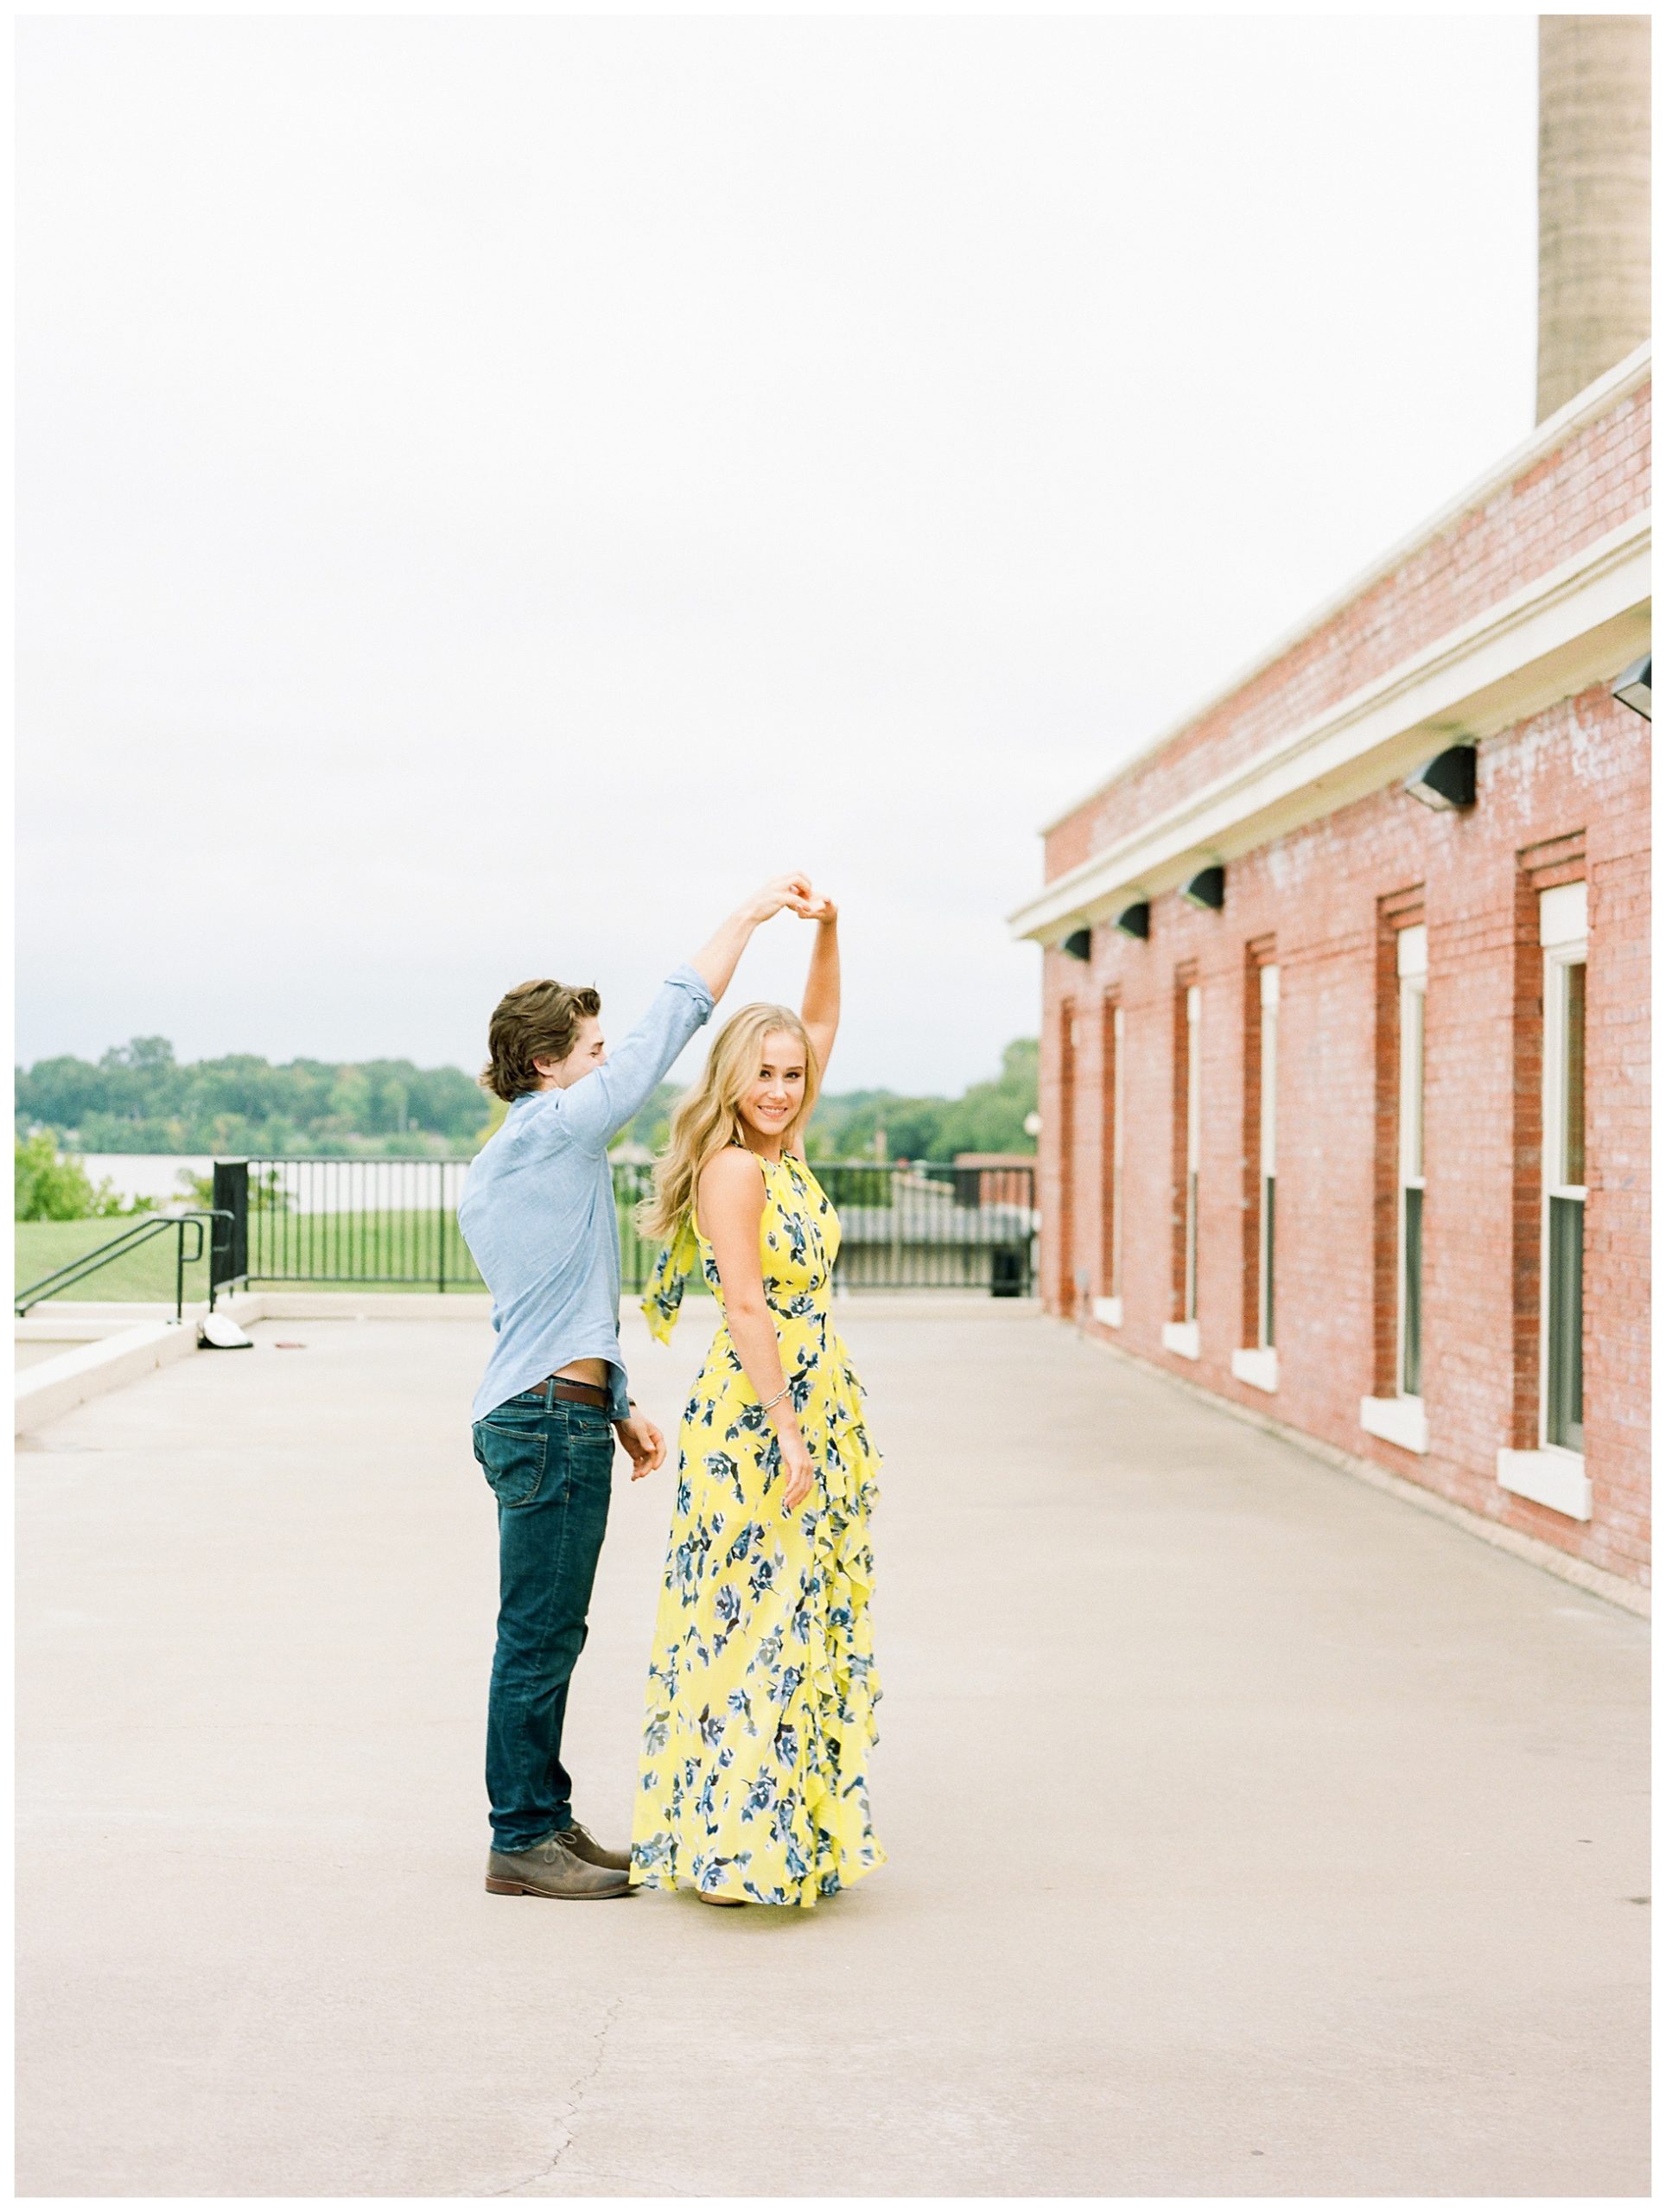 tips for posing during an engagement session